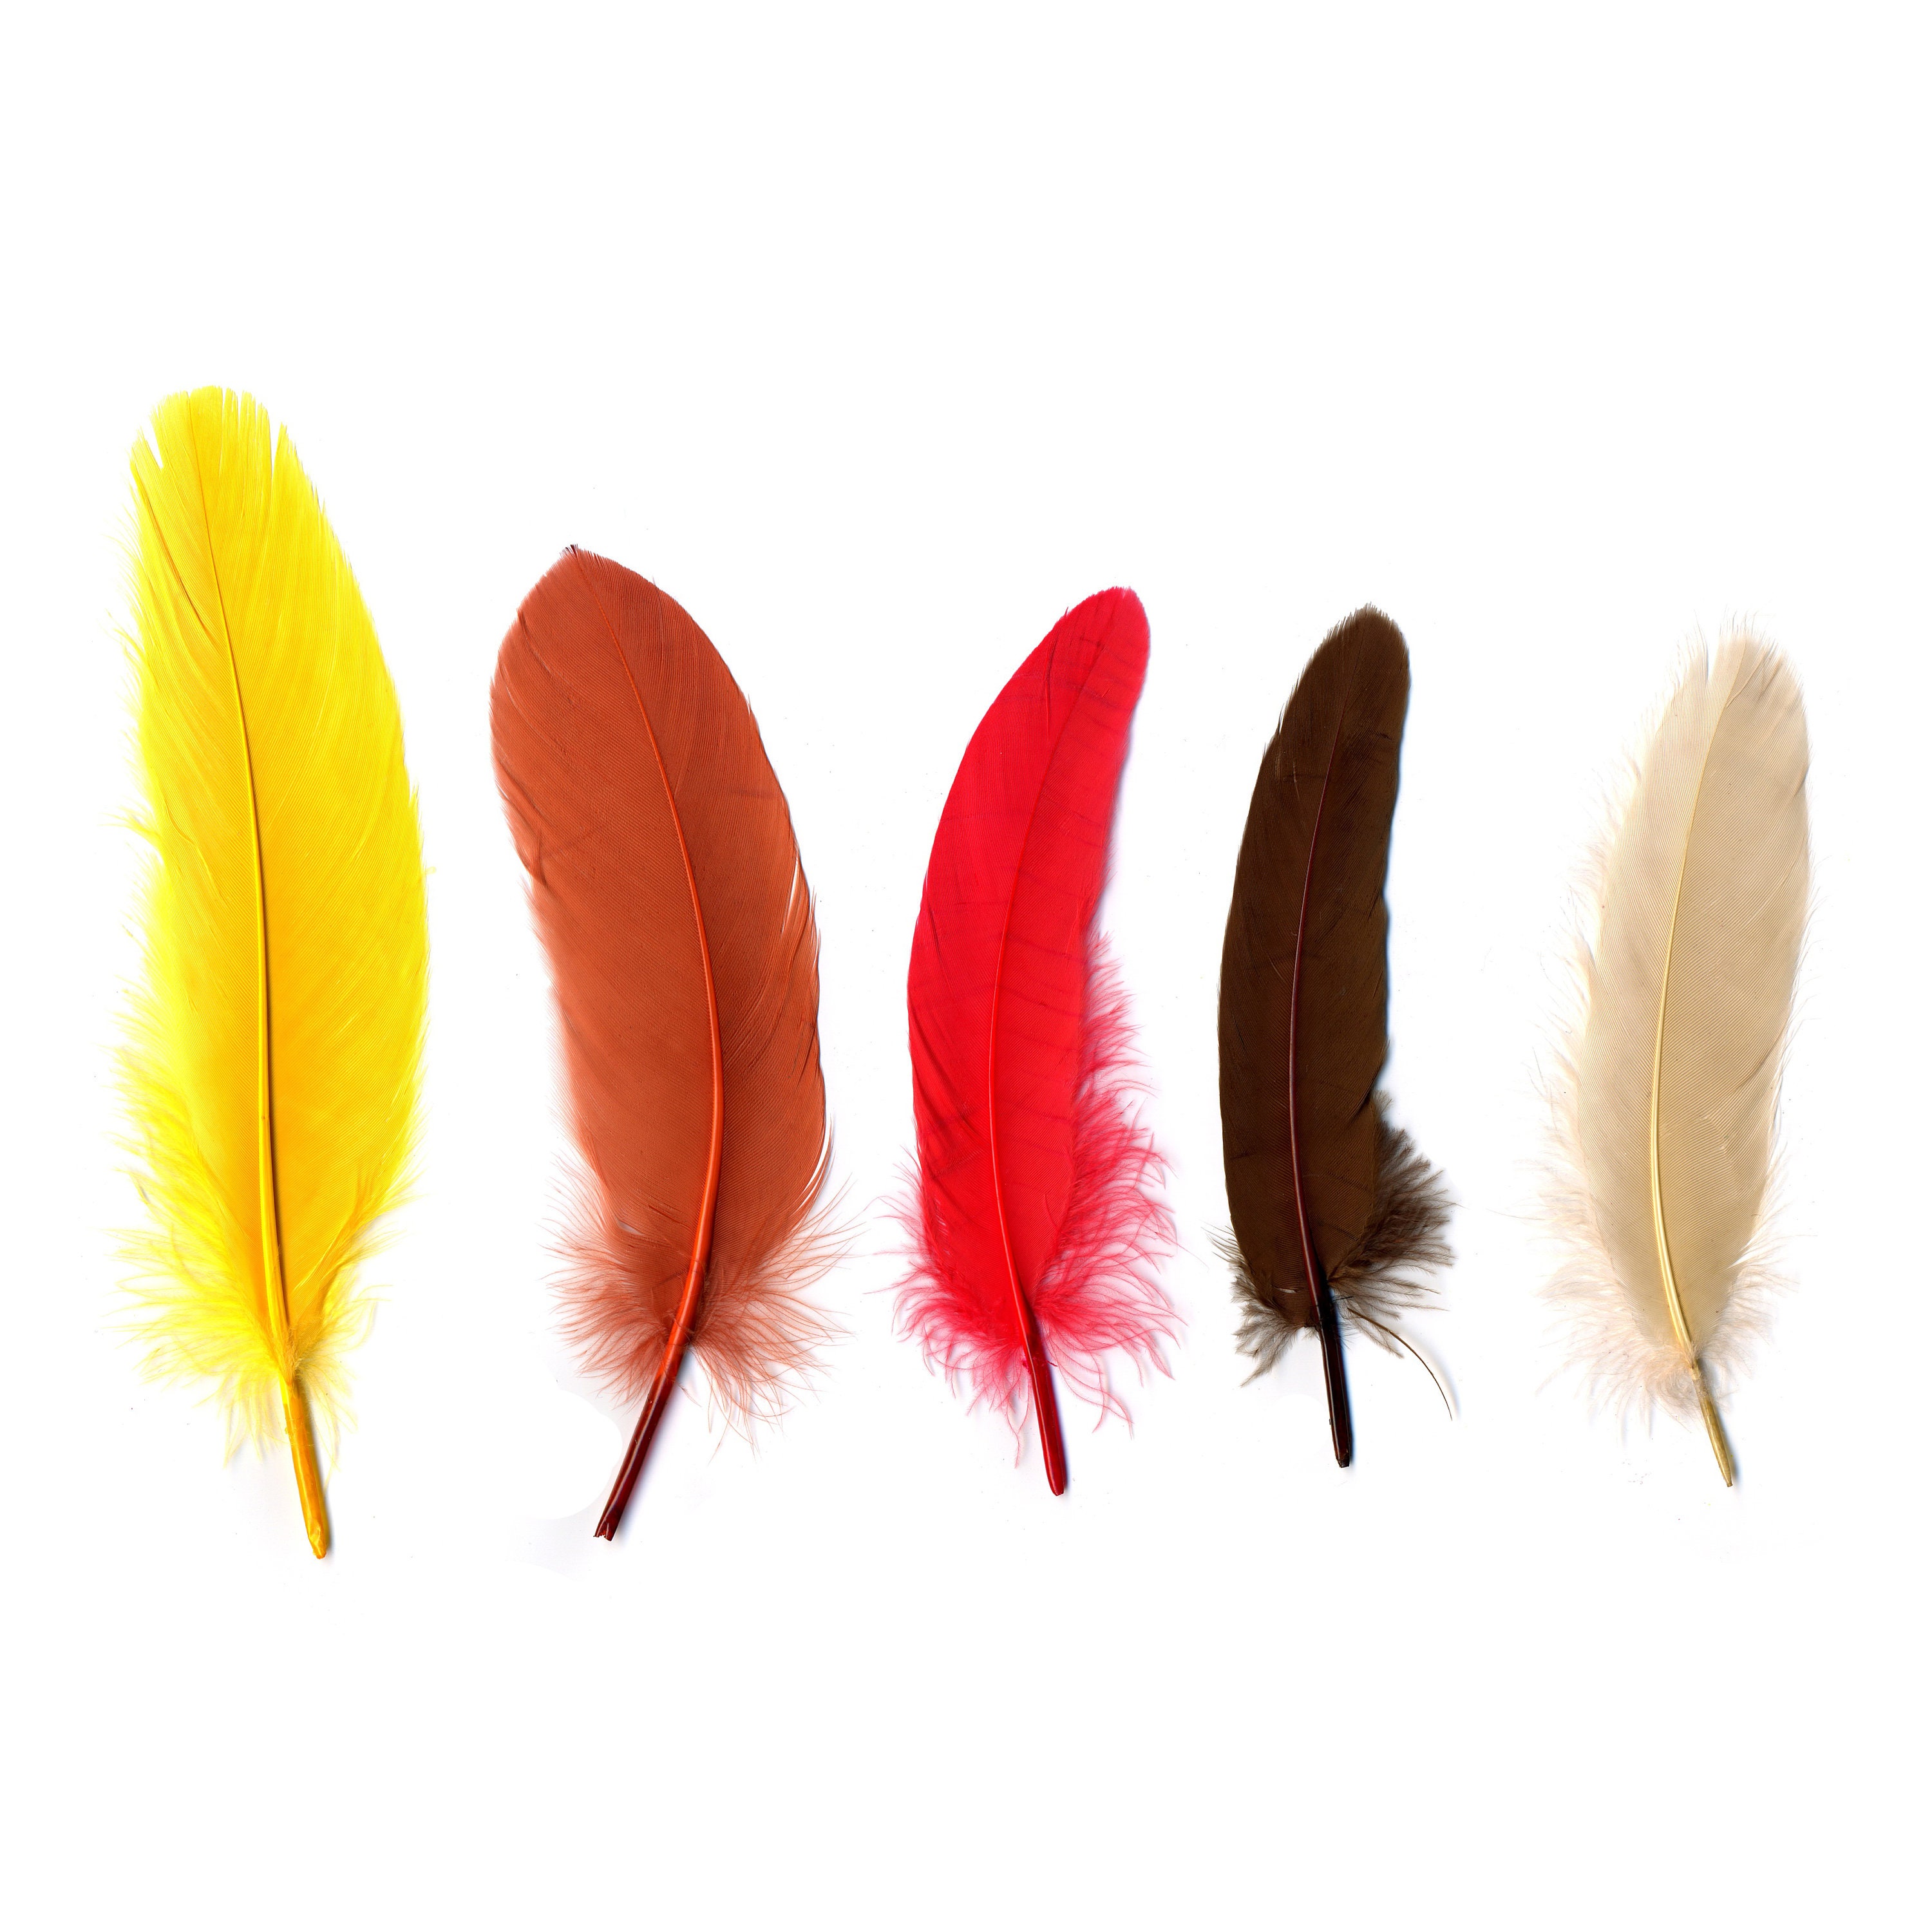 Goose Satinette Feathers, 4-6 Fall Mix Loose Goose Feathers, Assorted Earth  Tone Feathers, Small Feathers, Art and Craft Supplies ZUCKER®